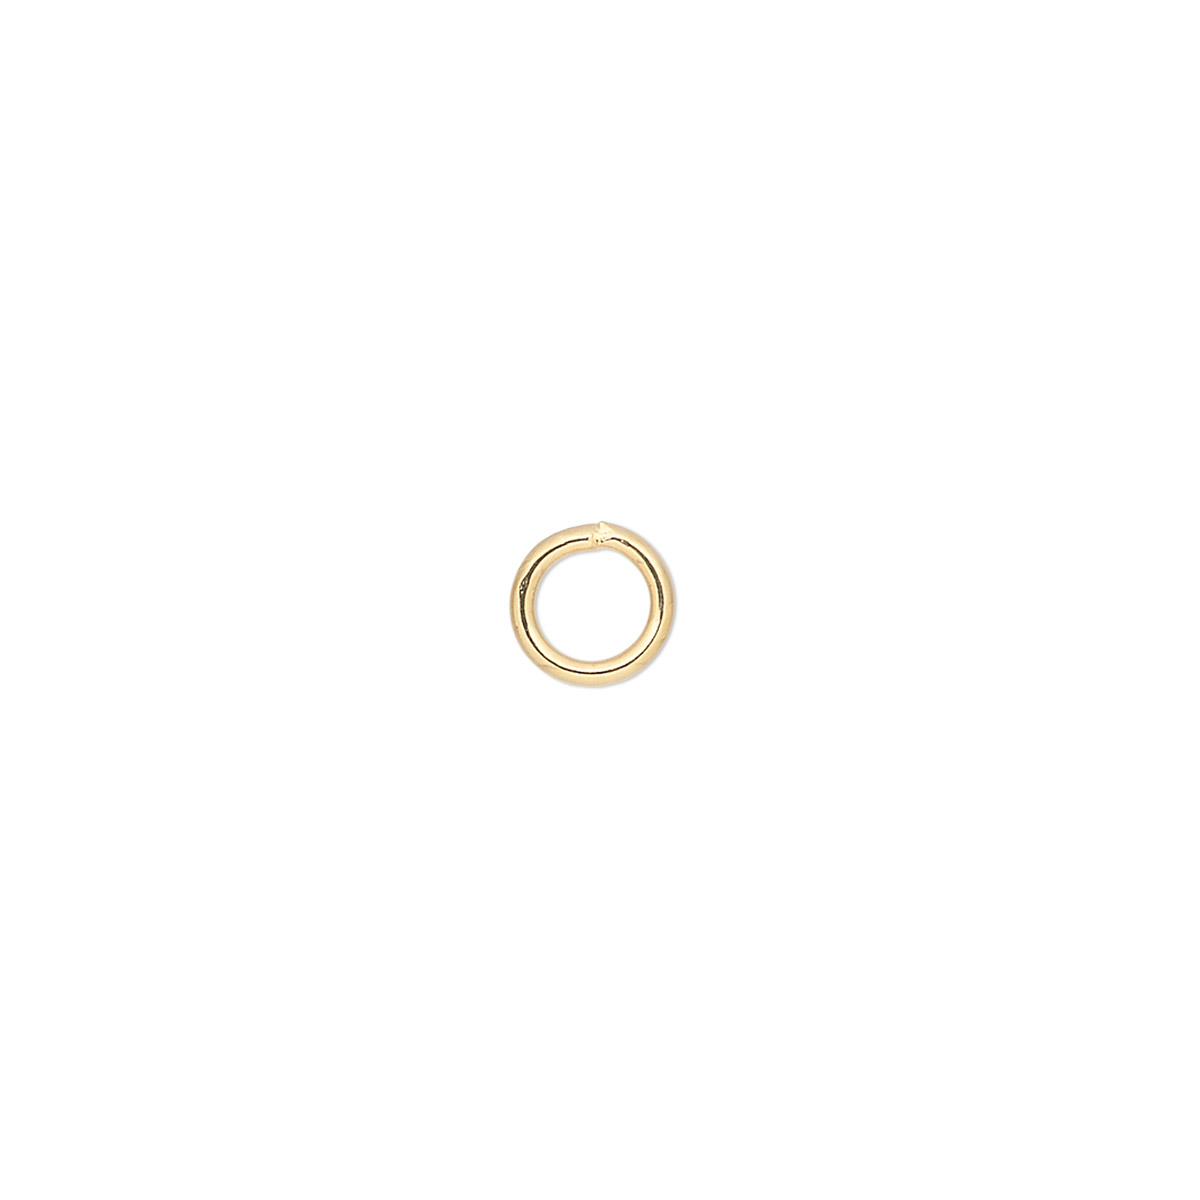 Jump ring, gold-plated brass, 6mm soldered round, 4.2mm inside diameter ...